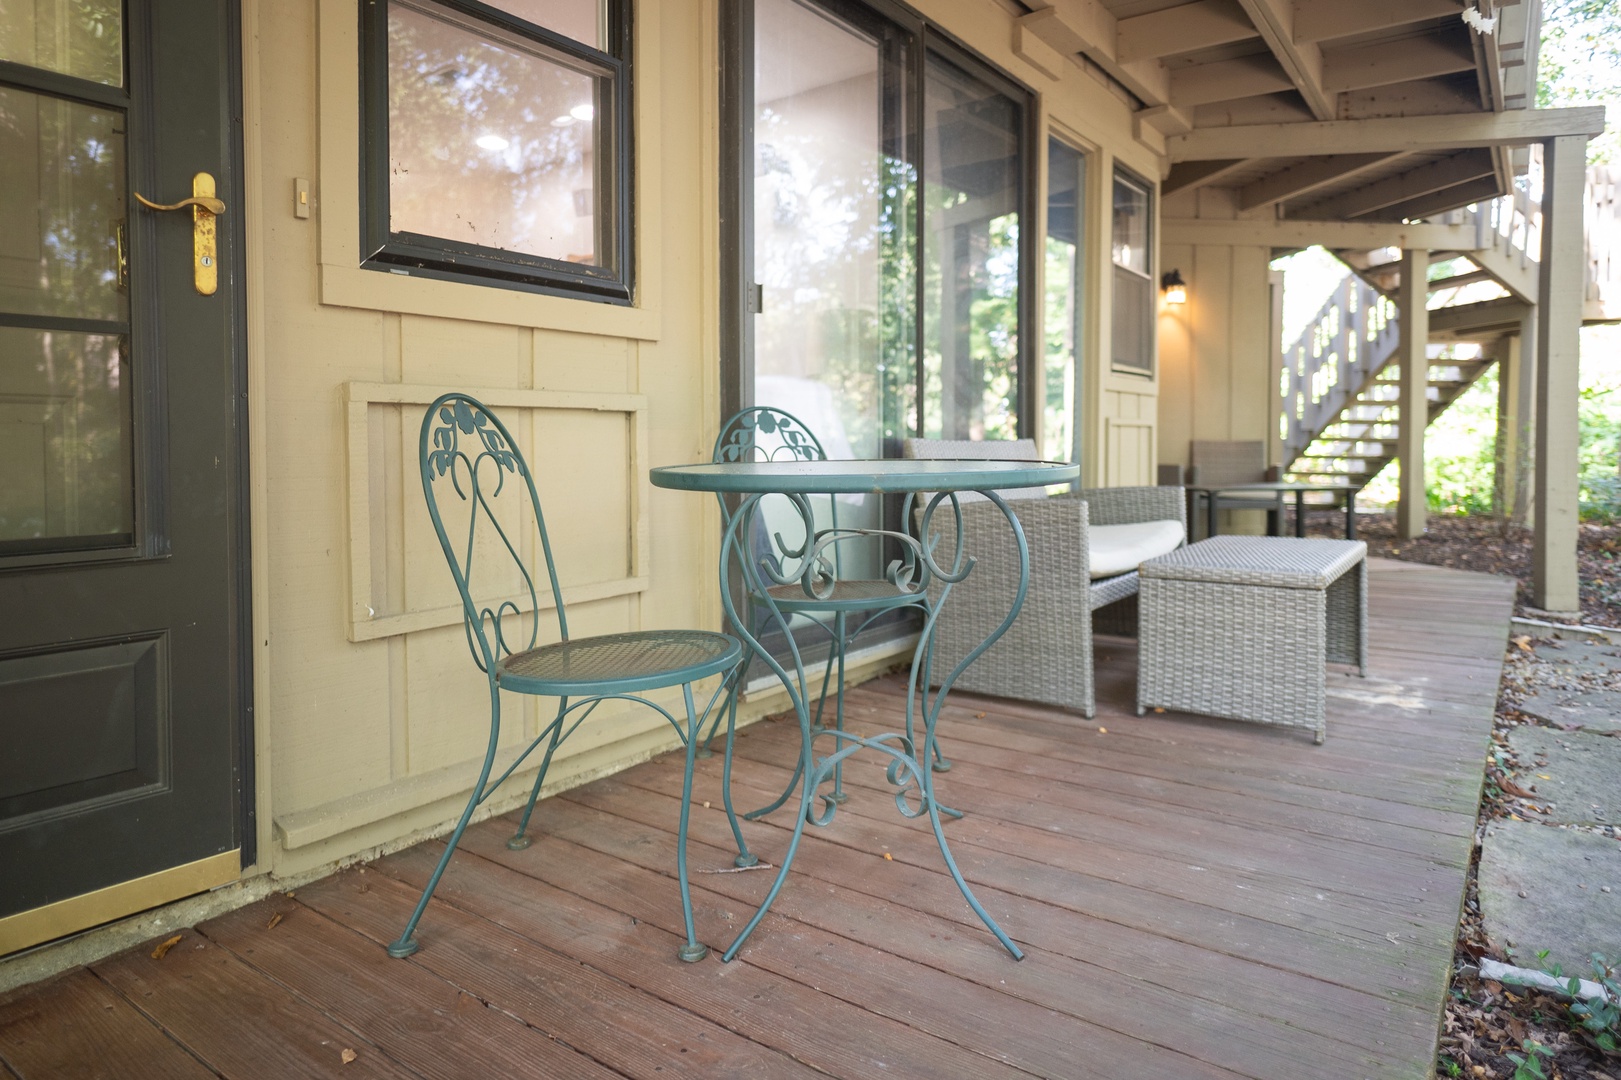 Dine & lounge on the serene back deck during your stay